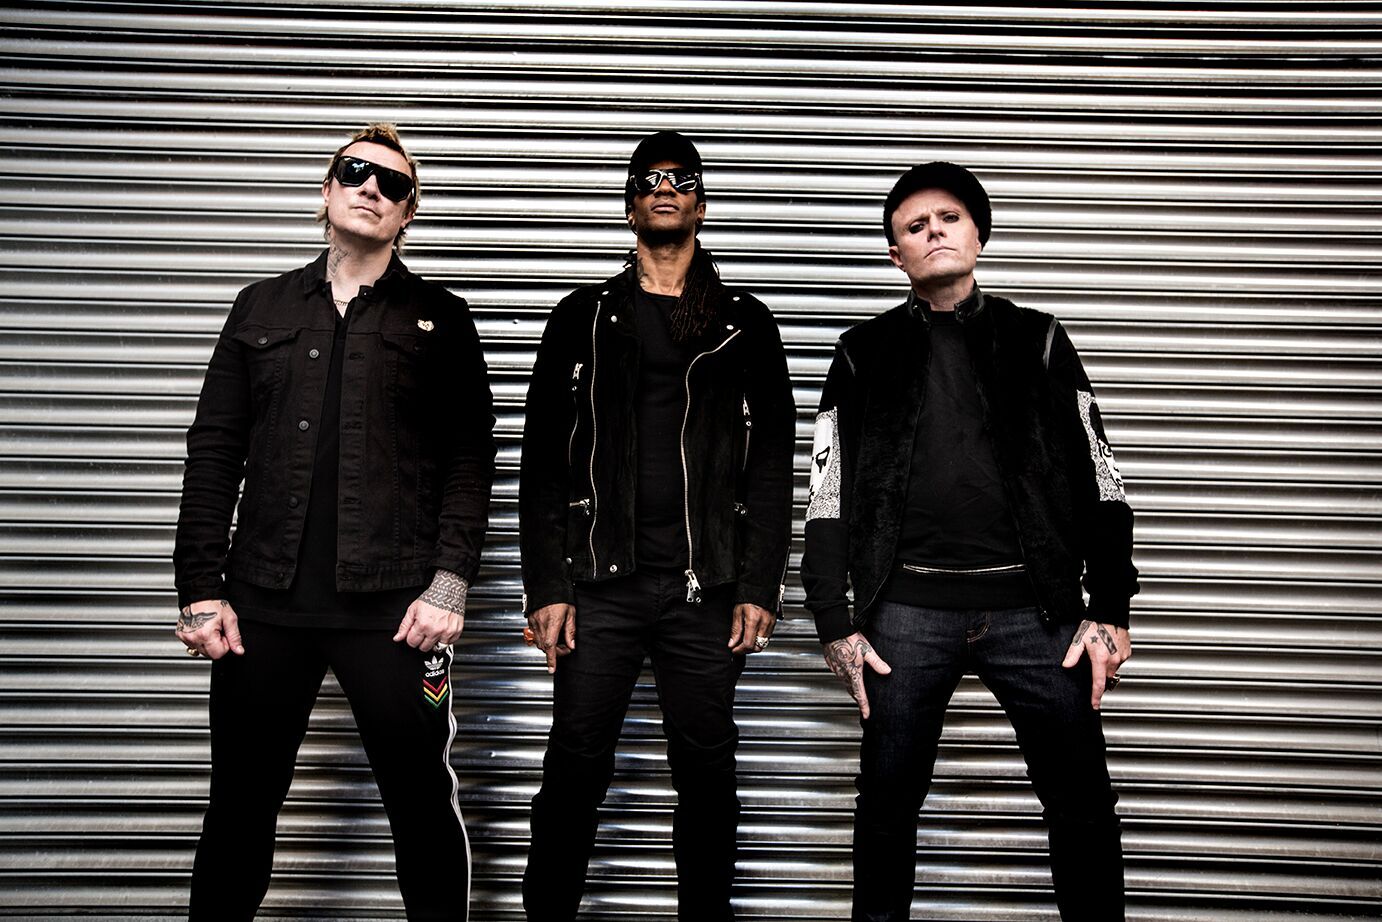 The Prodigy: 'We don't need to reinvent ourselves'